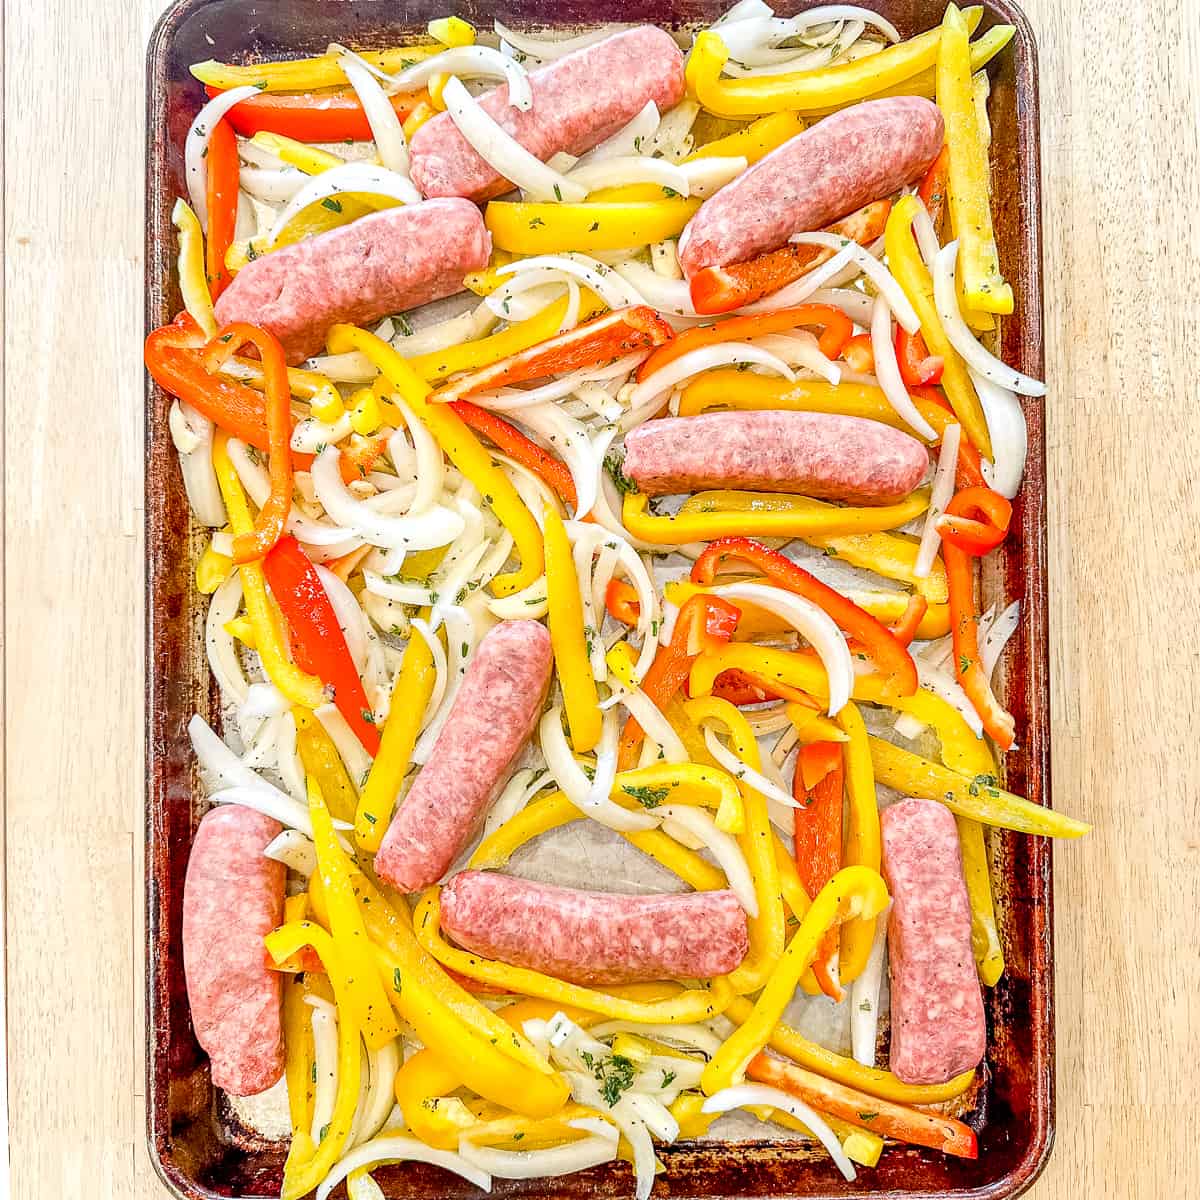 Sheet pan containing uncooked sausage and peppers.